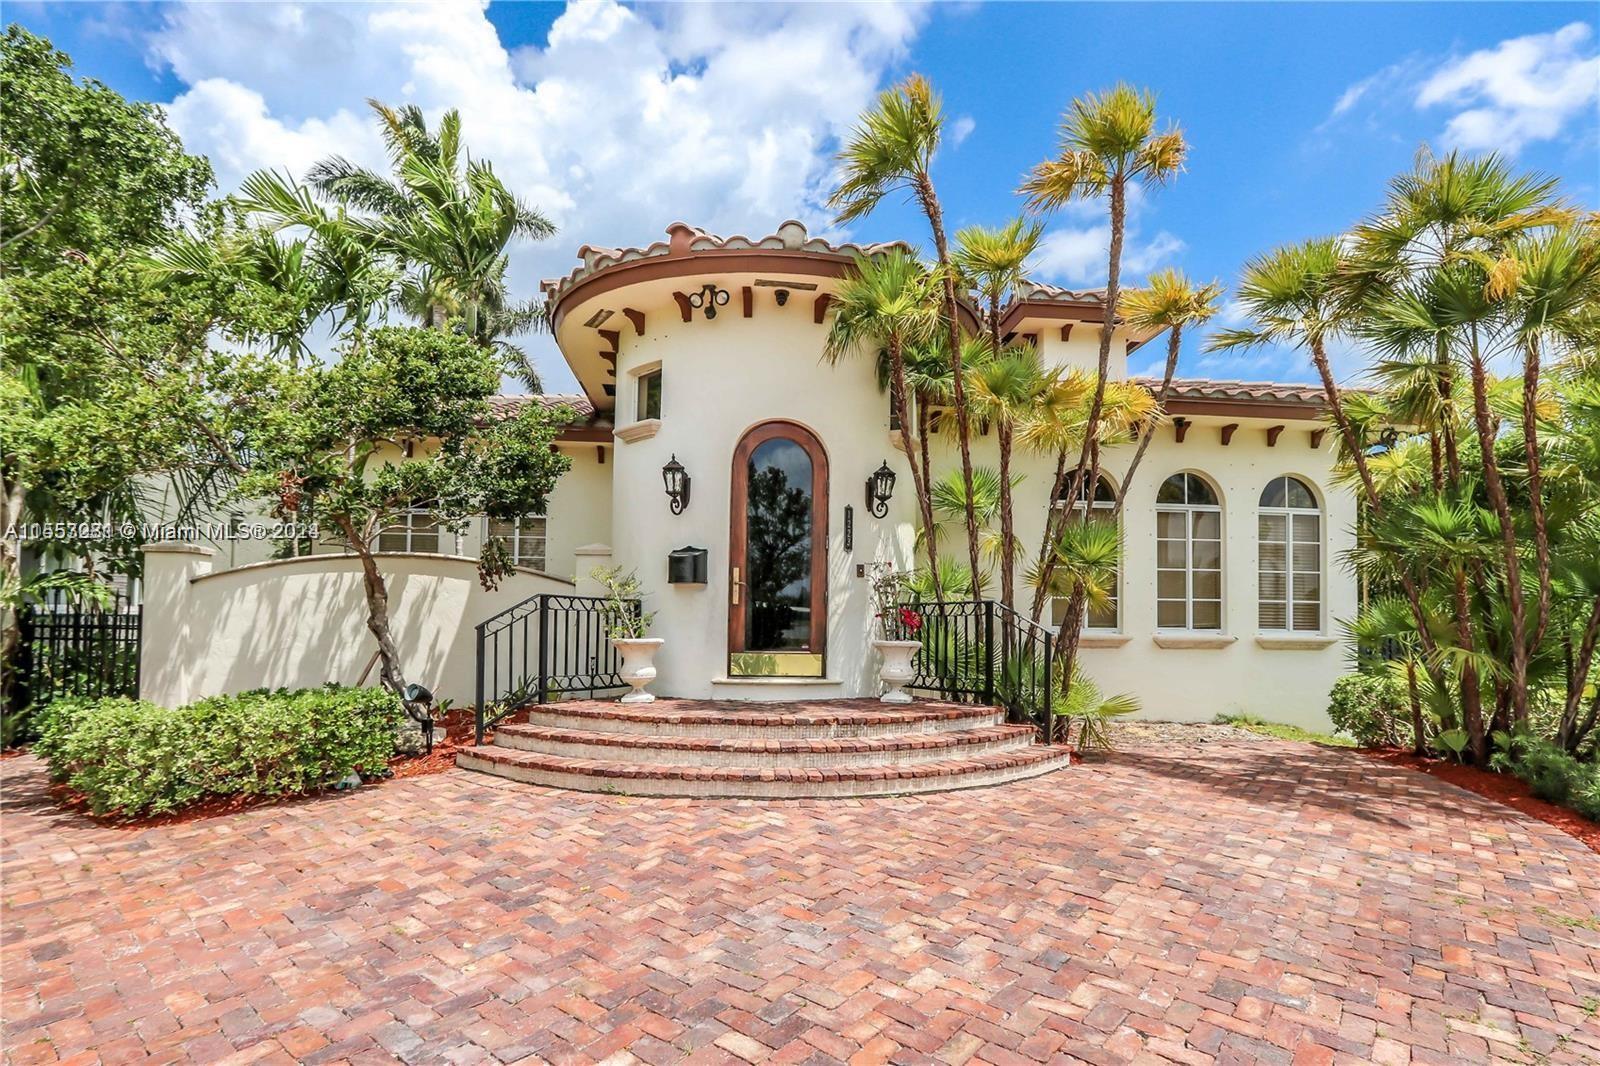 MEDITERRANEAN STYLE HOME WITH GORGEOUS LAKE VIEW. SOARING 12 FT CEILINGS THROUGHOUT THE HOUSE. OPEN 